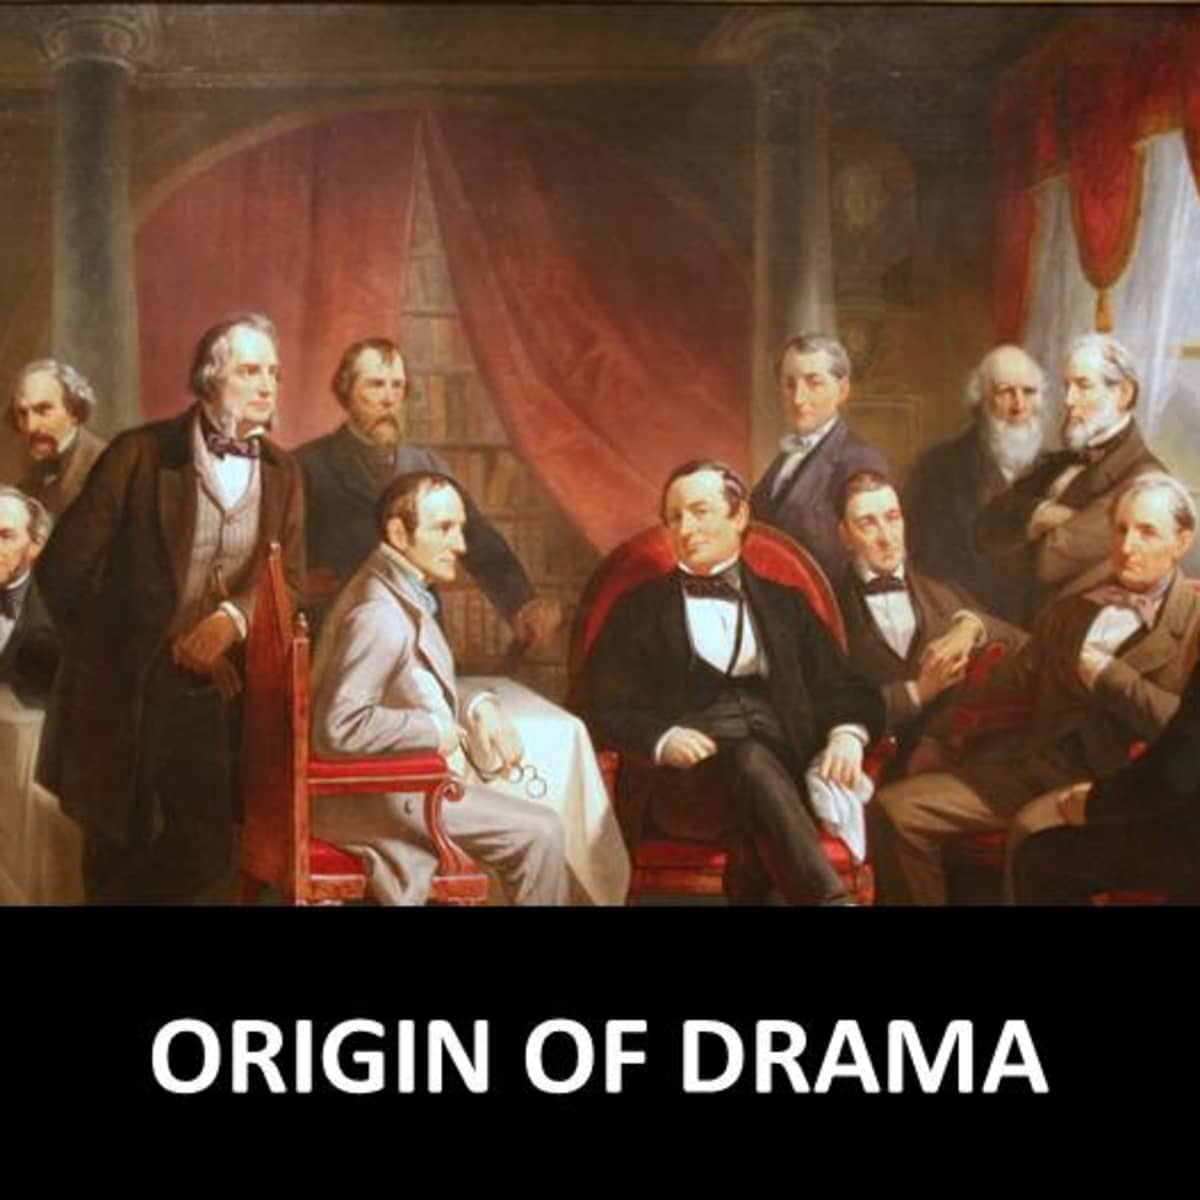 importance of drama in life